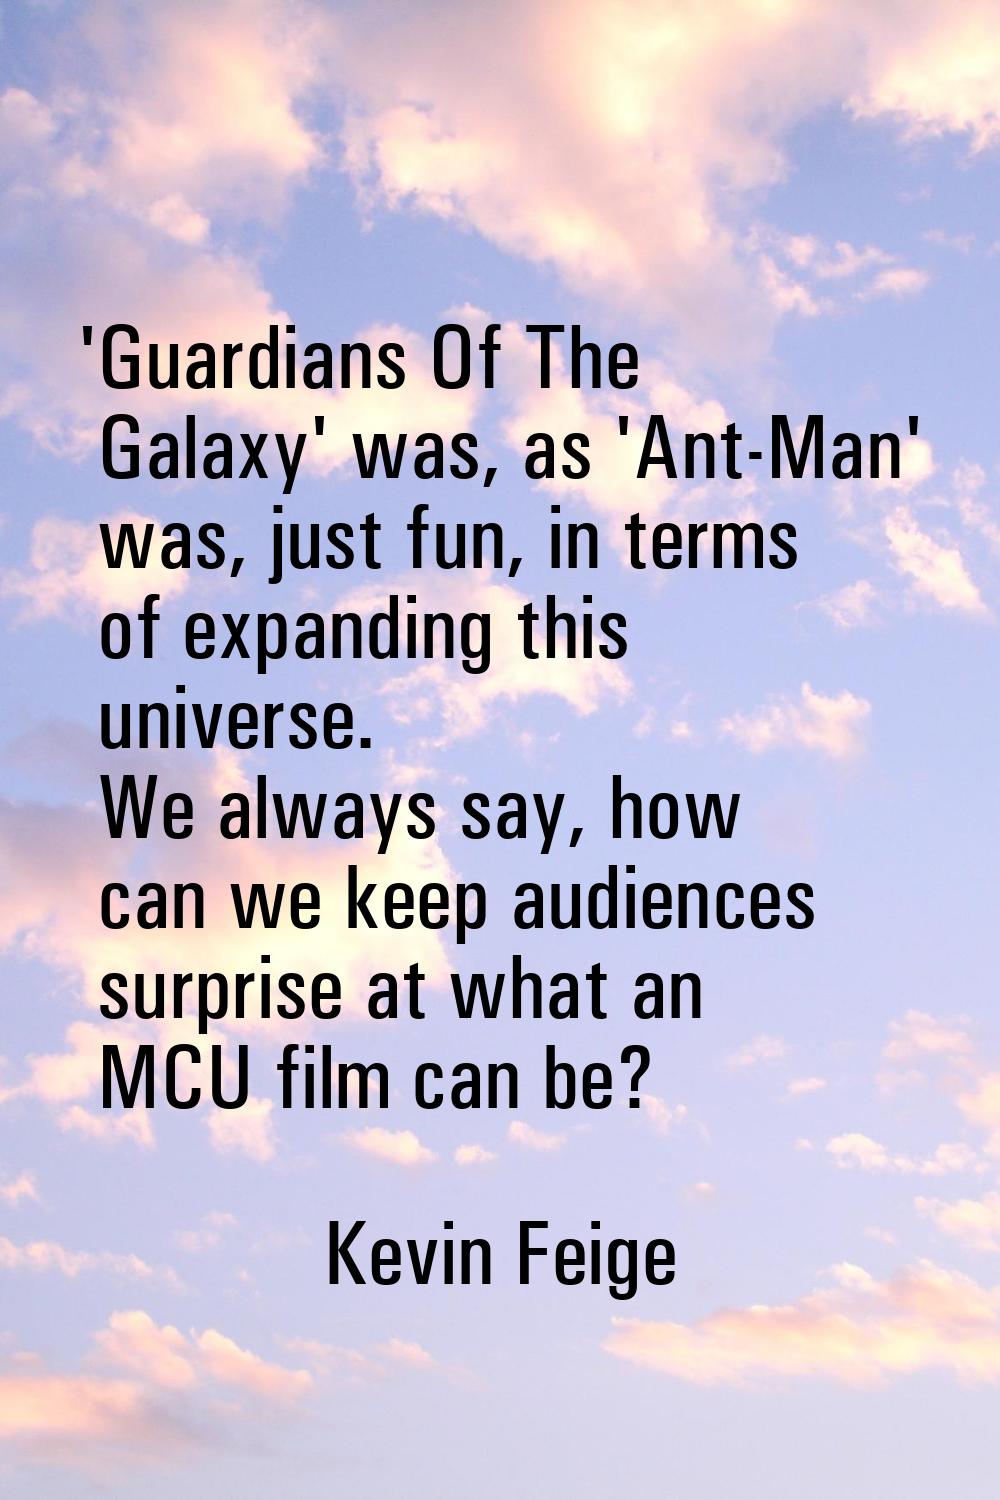 'Guardians Of The Galaxy' was, as 'Ant-Man' was, just fun, in terms of expanding this universe. We 